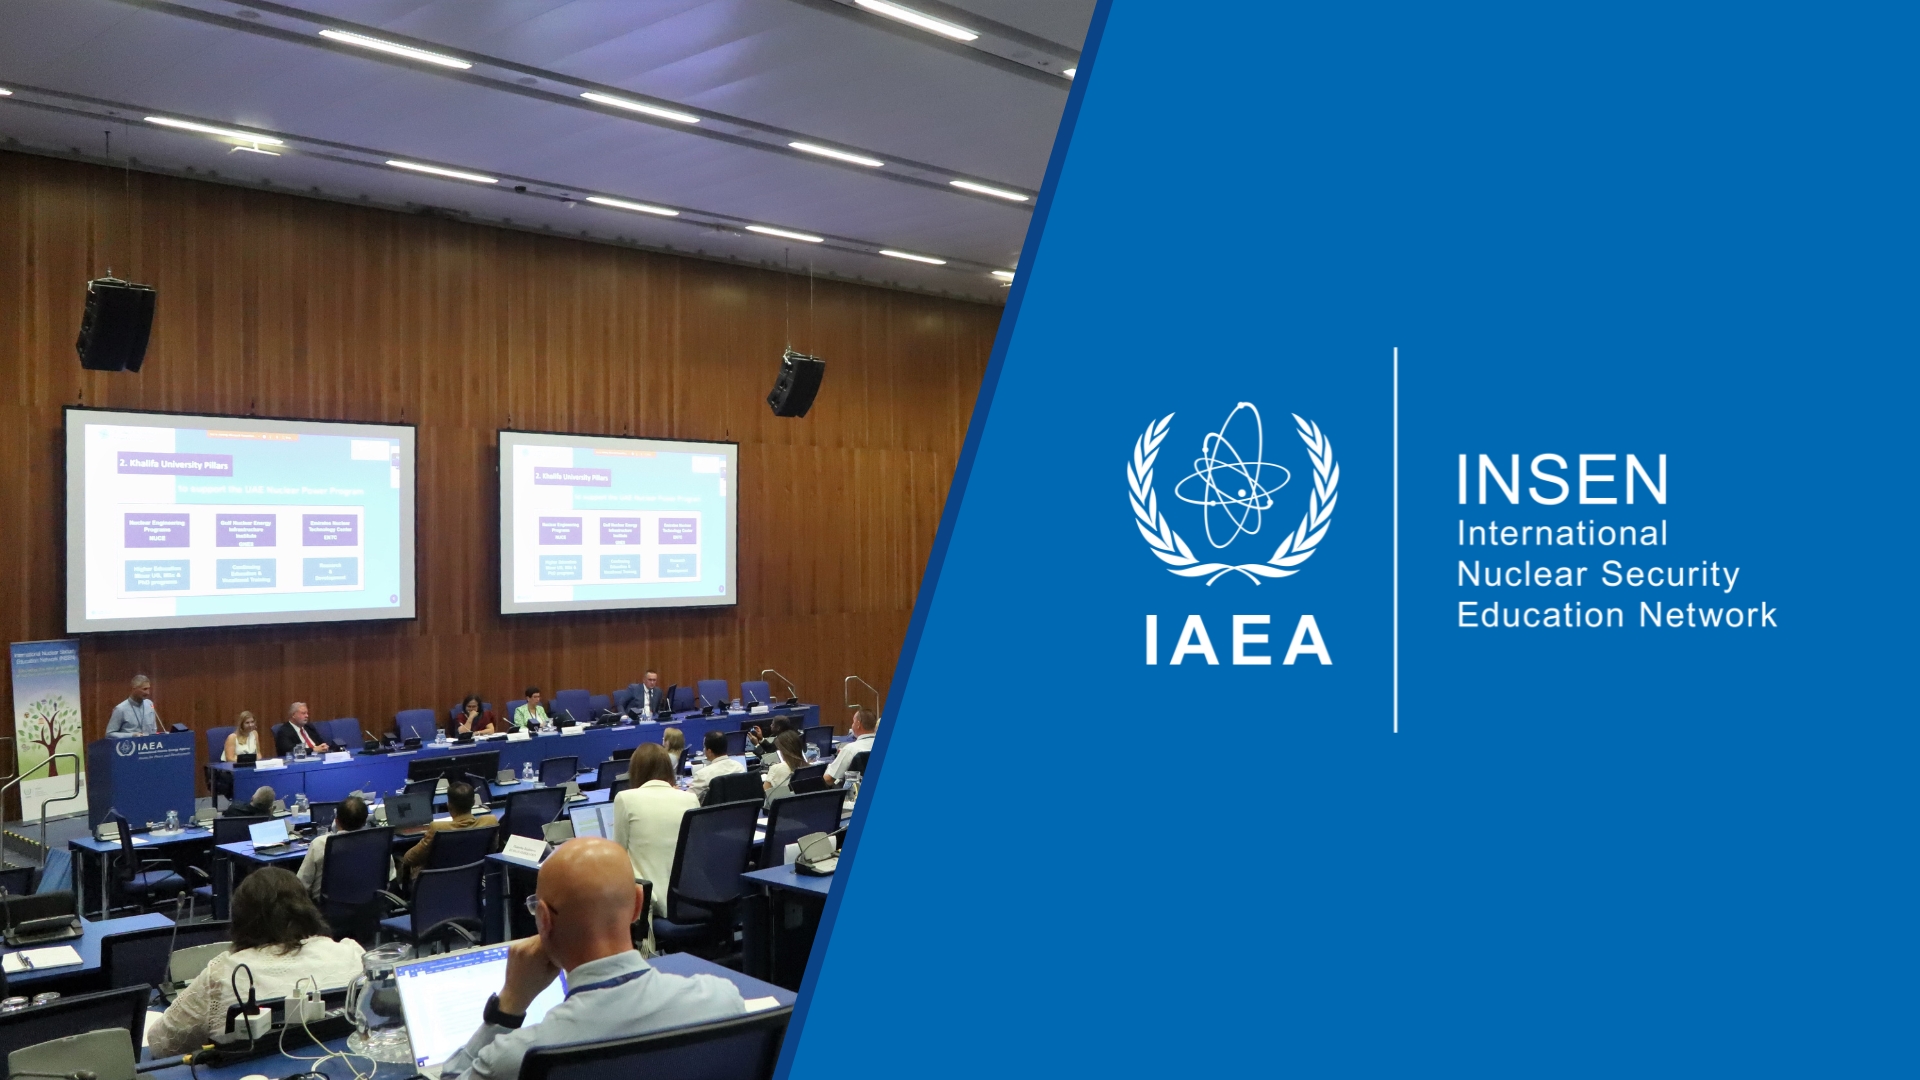 IAEA Collaborates with Universities for Nuclear Security Education